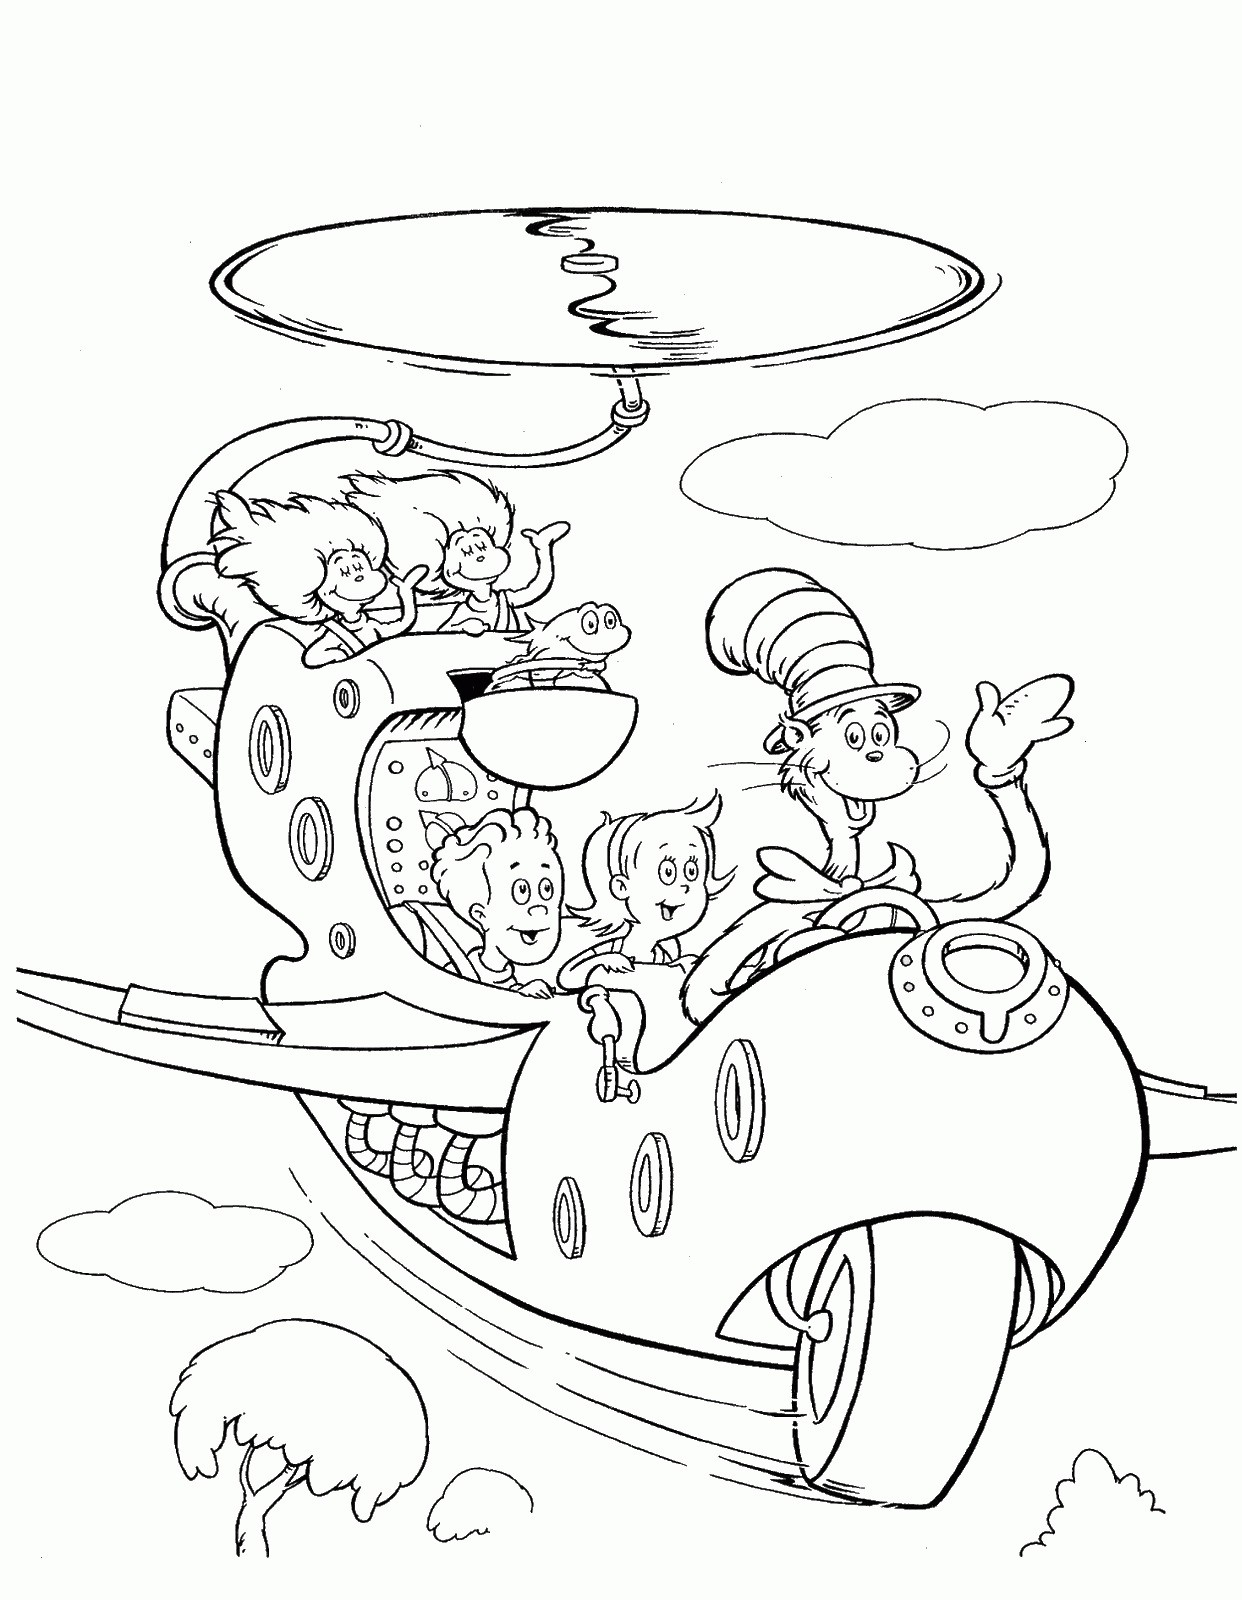 cat in the hat coloring pages inspirational coloring book and pages dr seuss quotes coloring pages of cat in the hat coloring pages